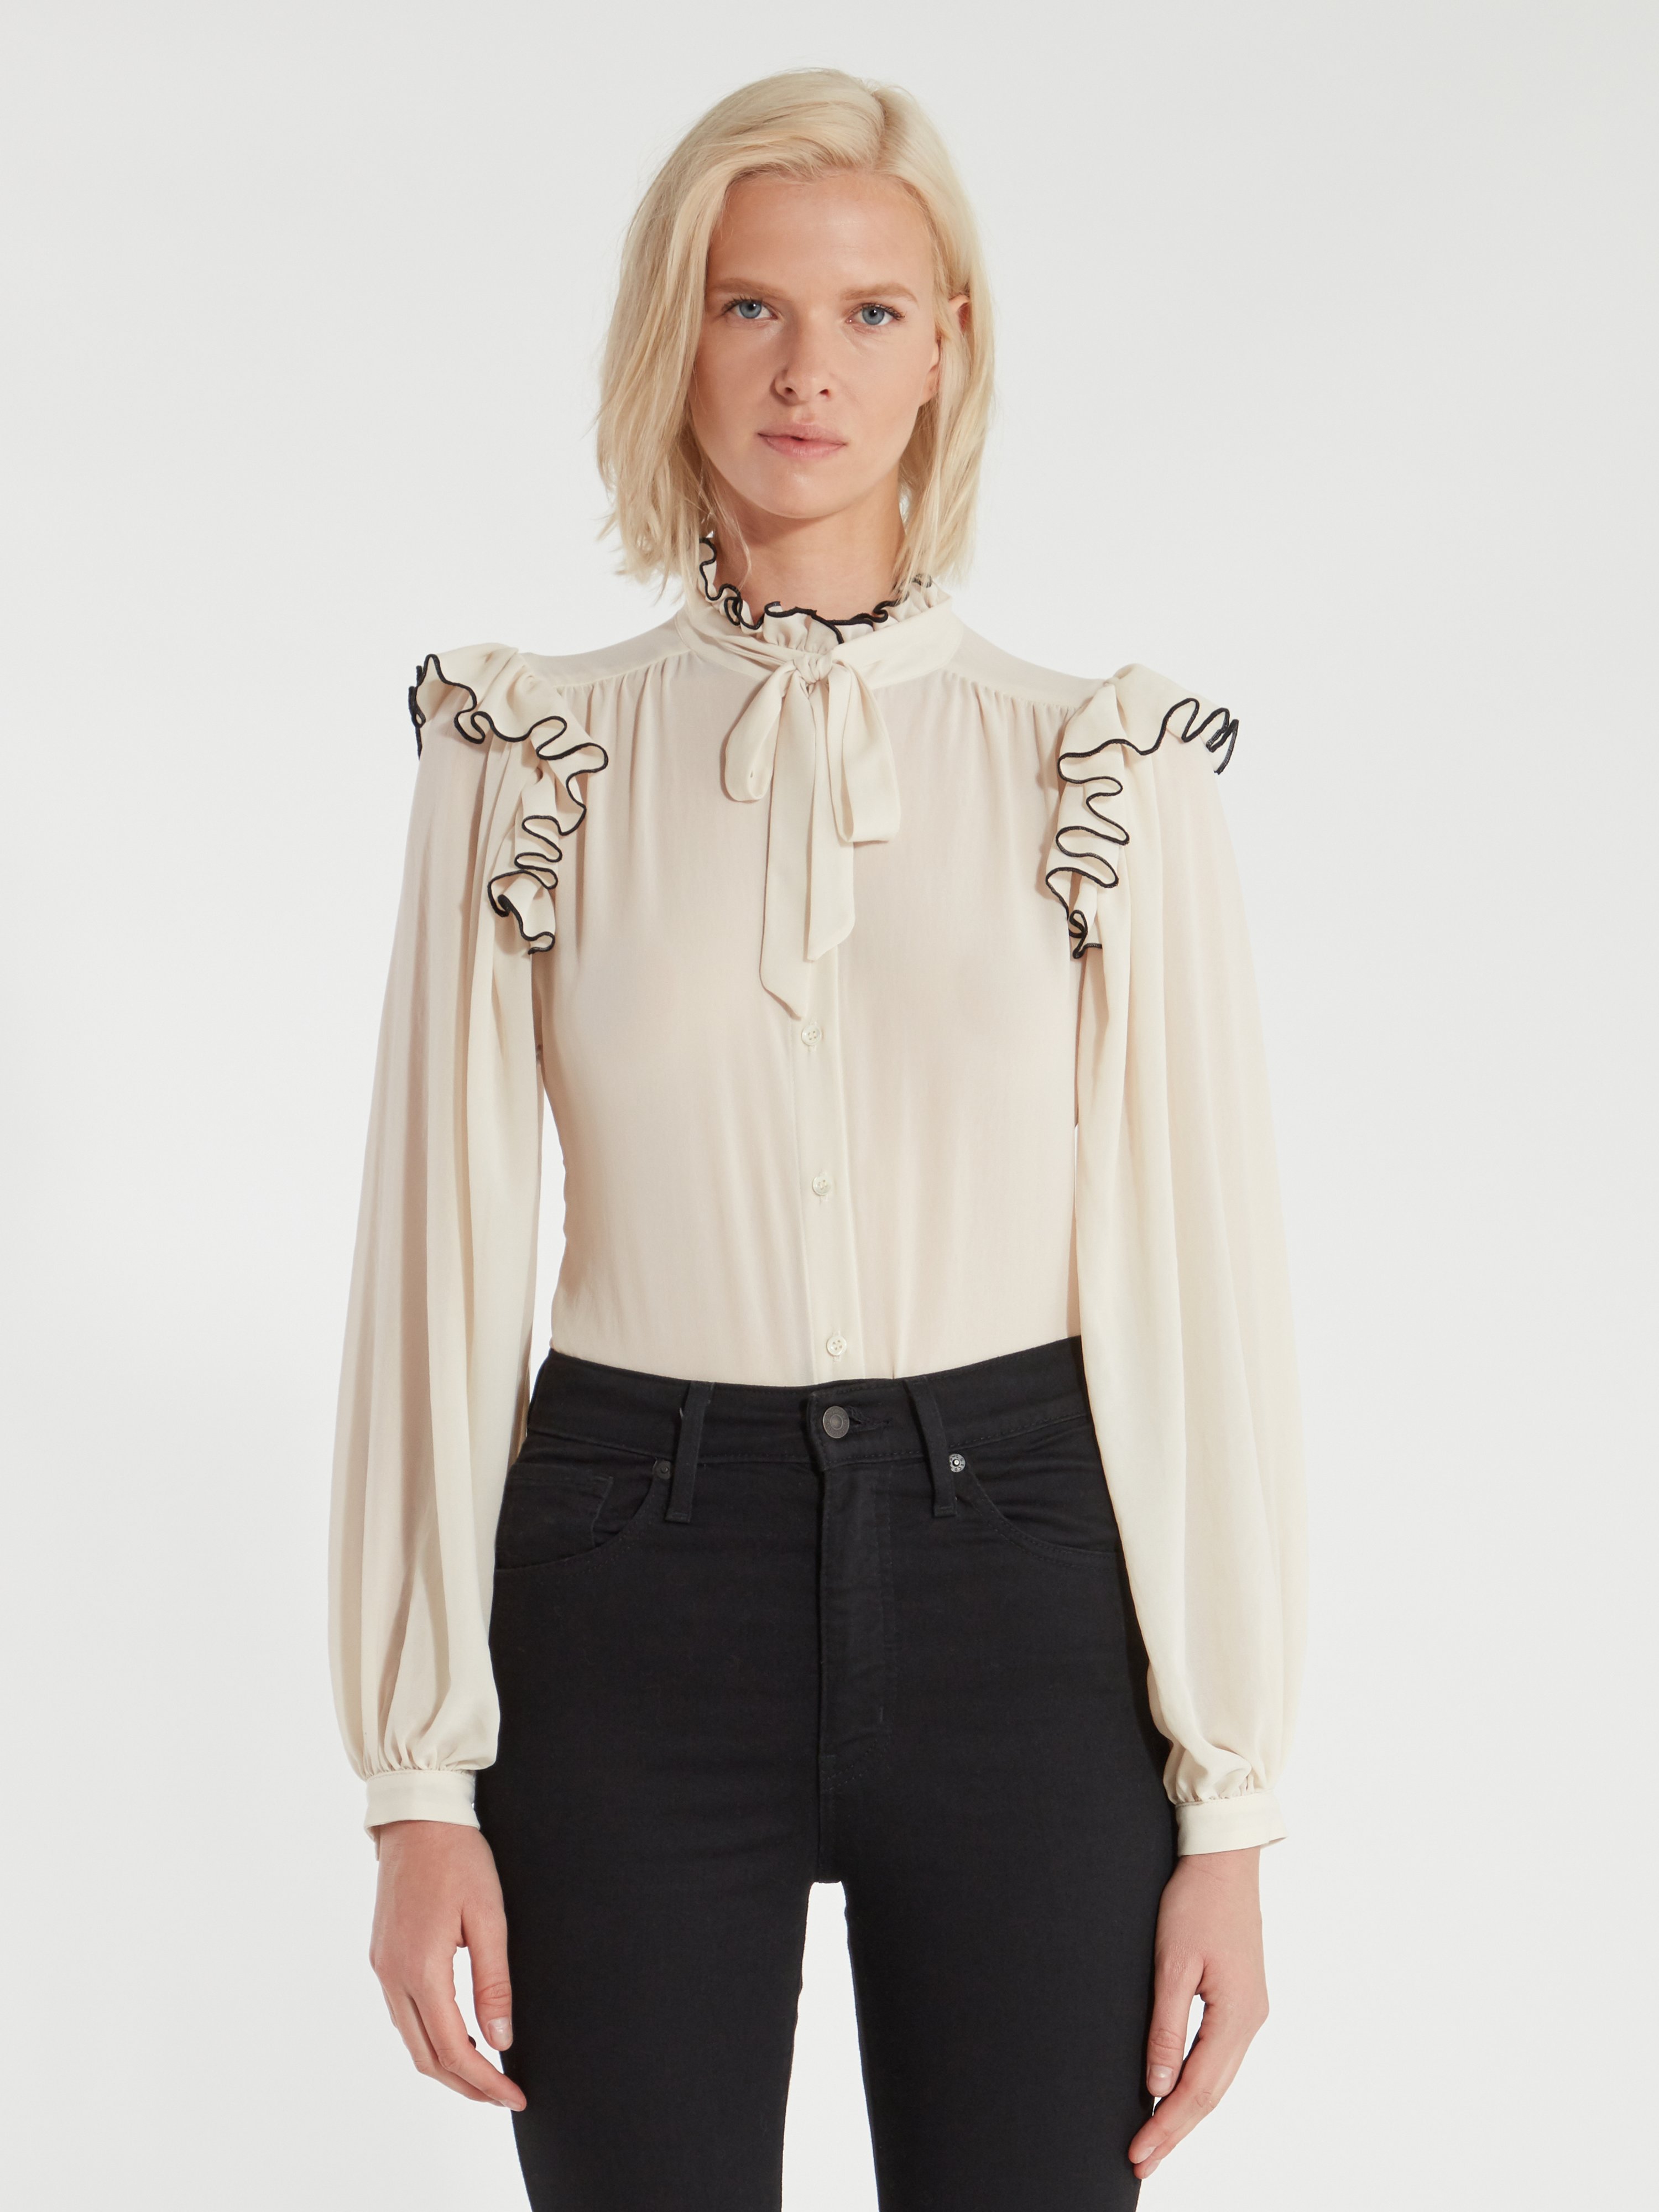 Icons Objects Of Devotion The Silk Secretary Blouse In Ivory